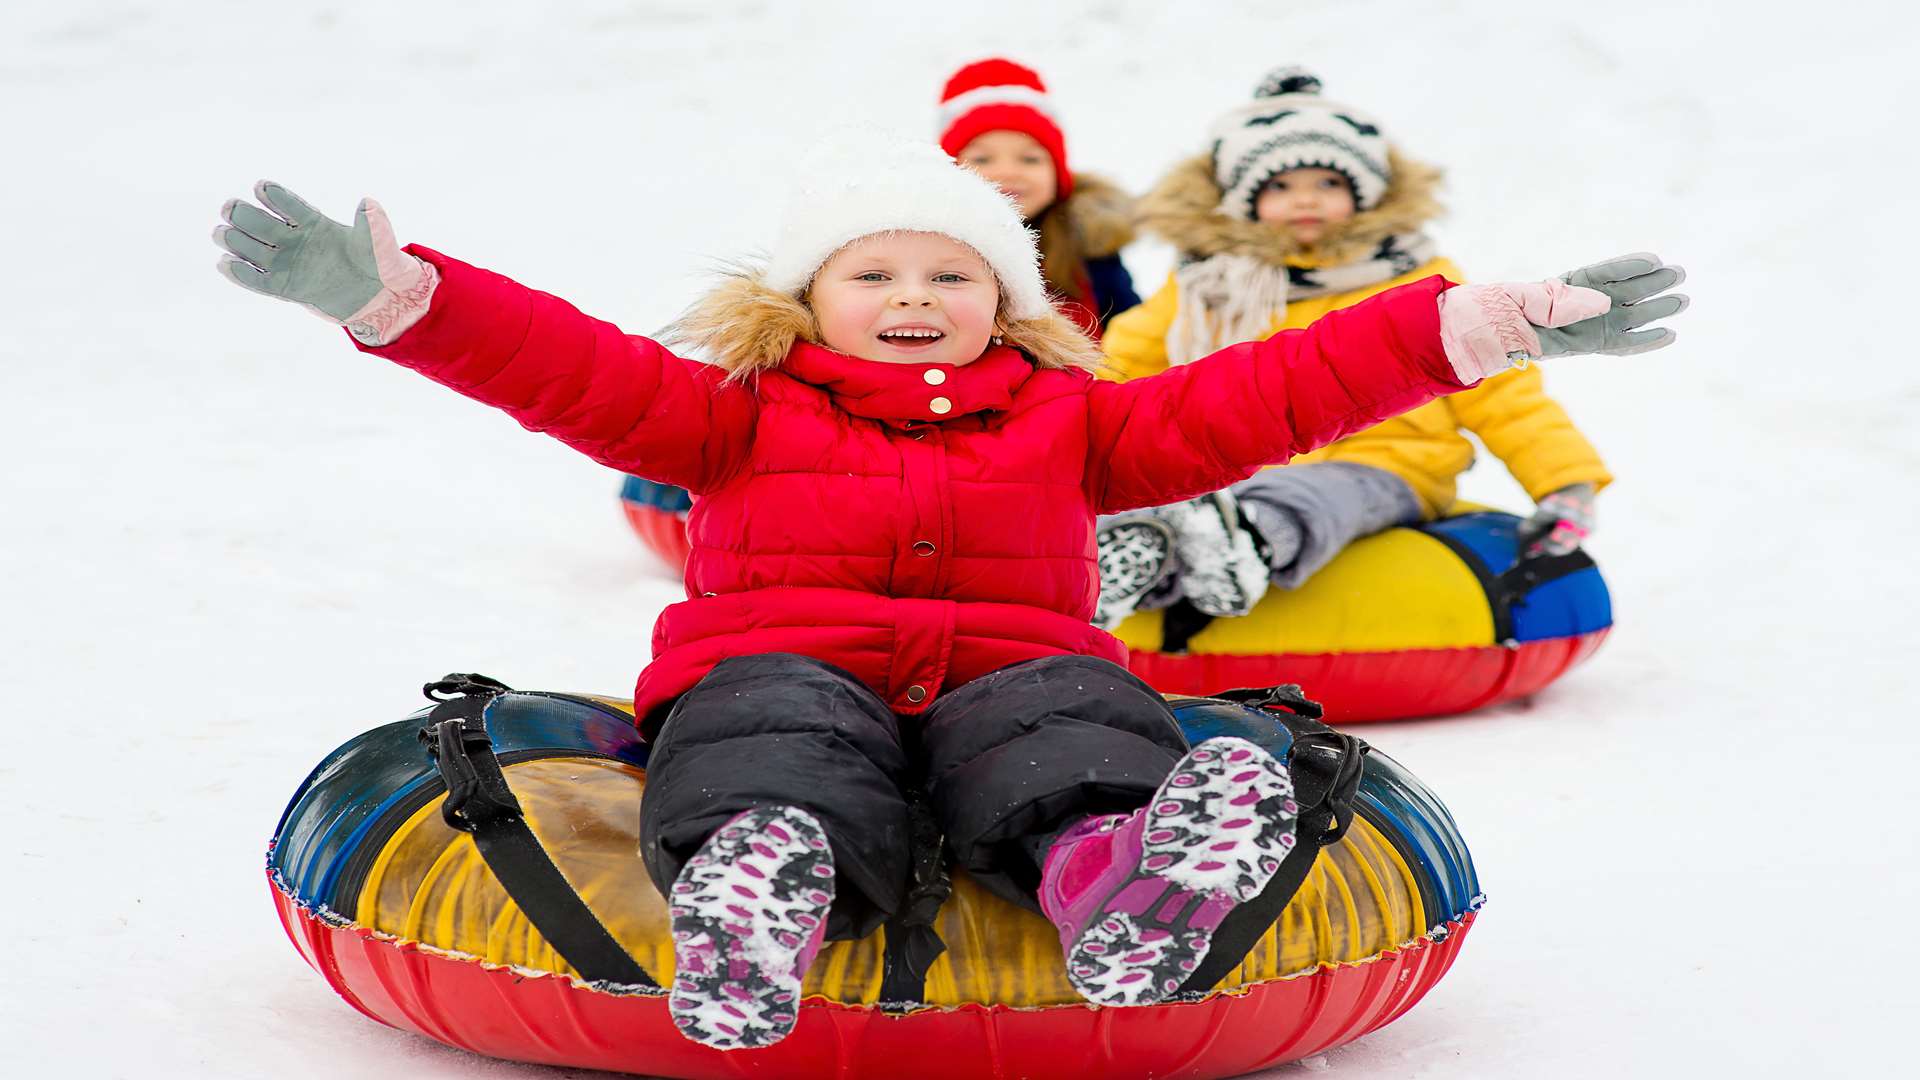 Try snow tubing at Betteshanger Country Park, Deal this winter